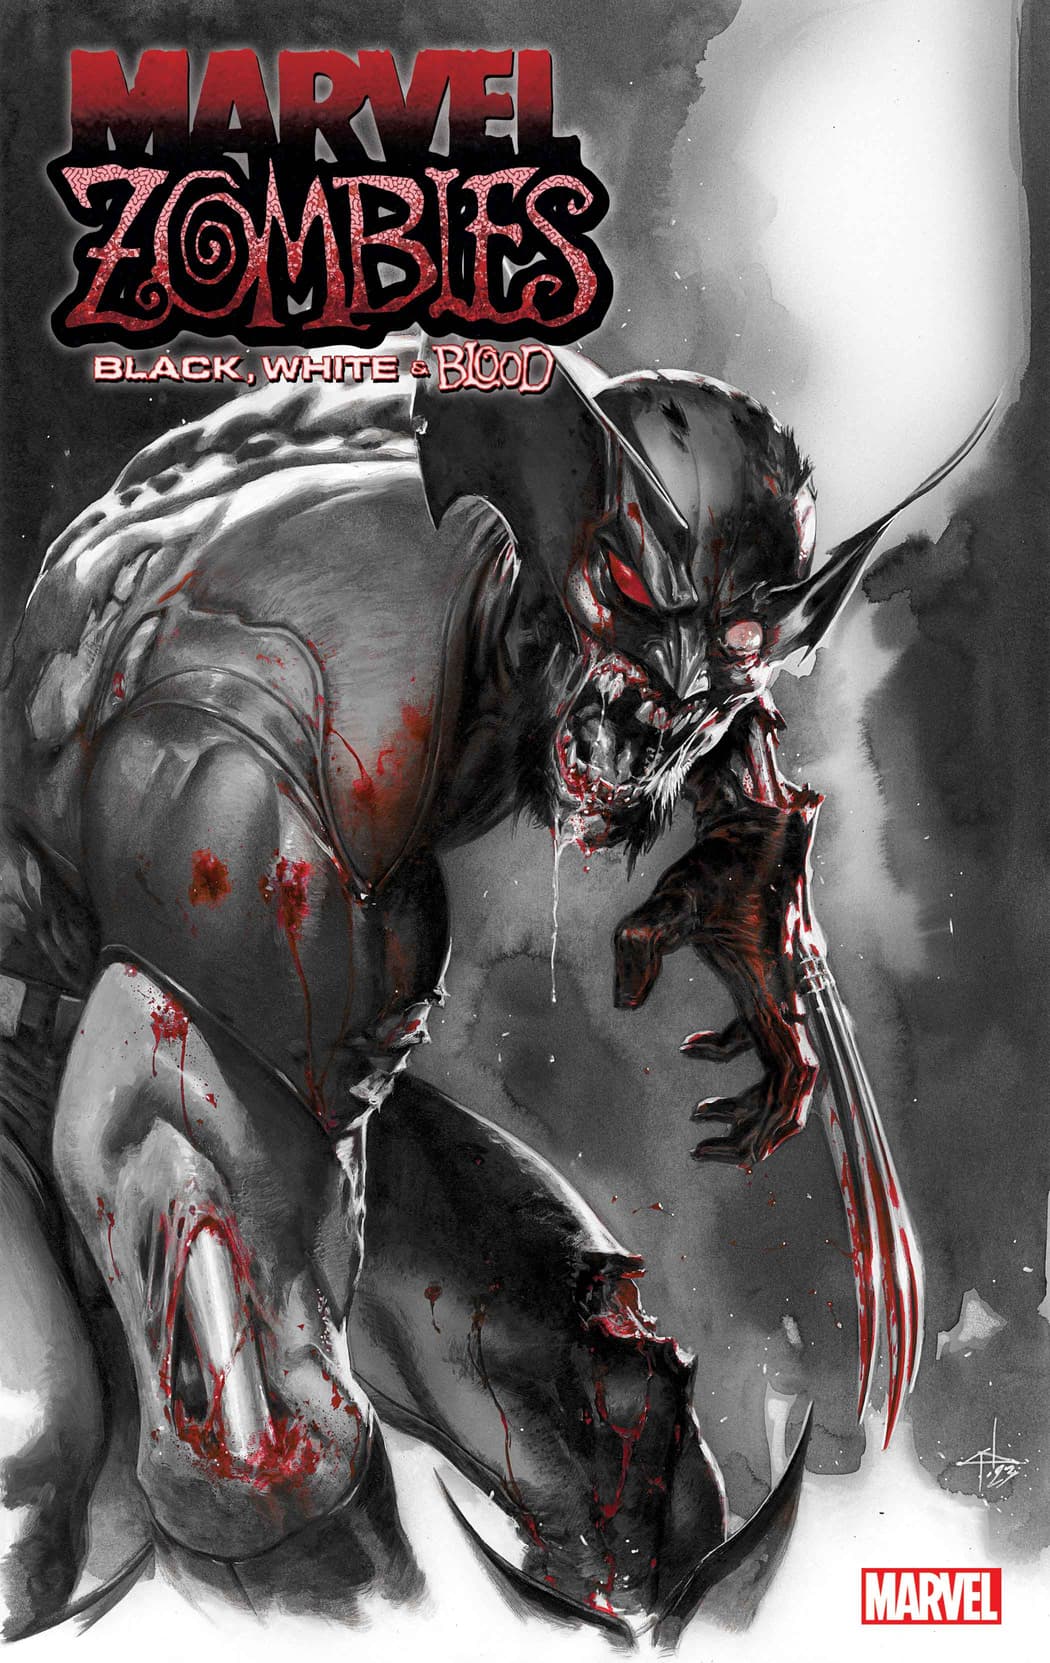 MARVEL ZOMBIES: BLACK, WHITE, & BLOOD #1 Cover by Gabriele Dell'Otto